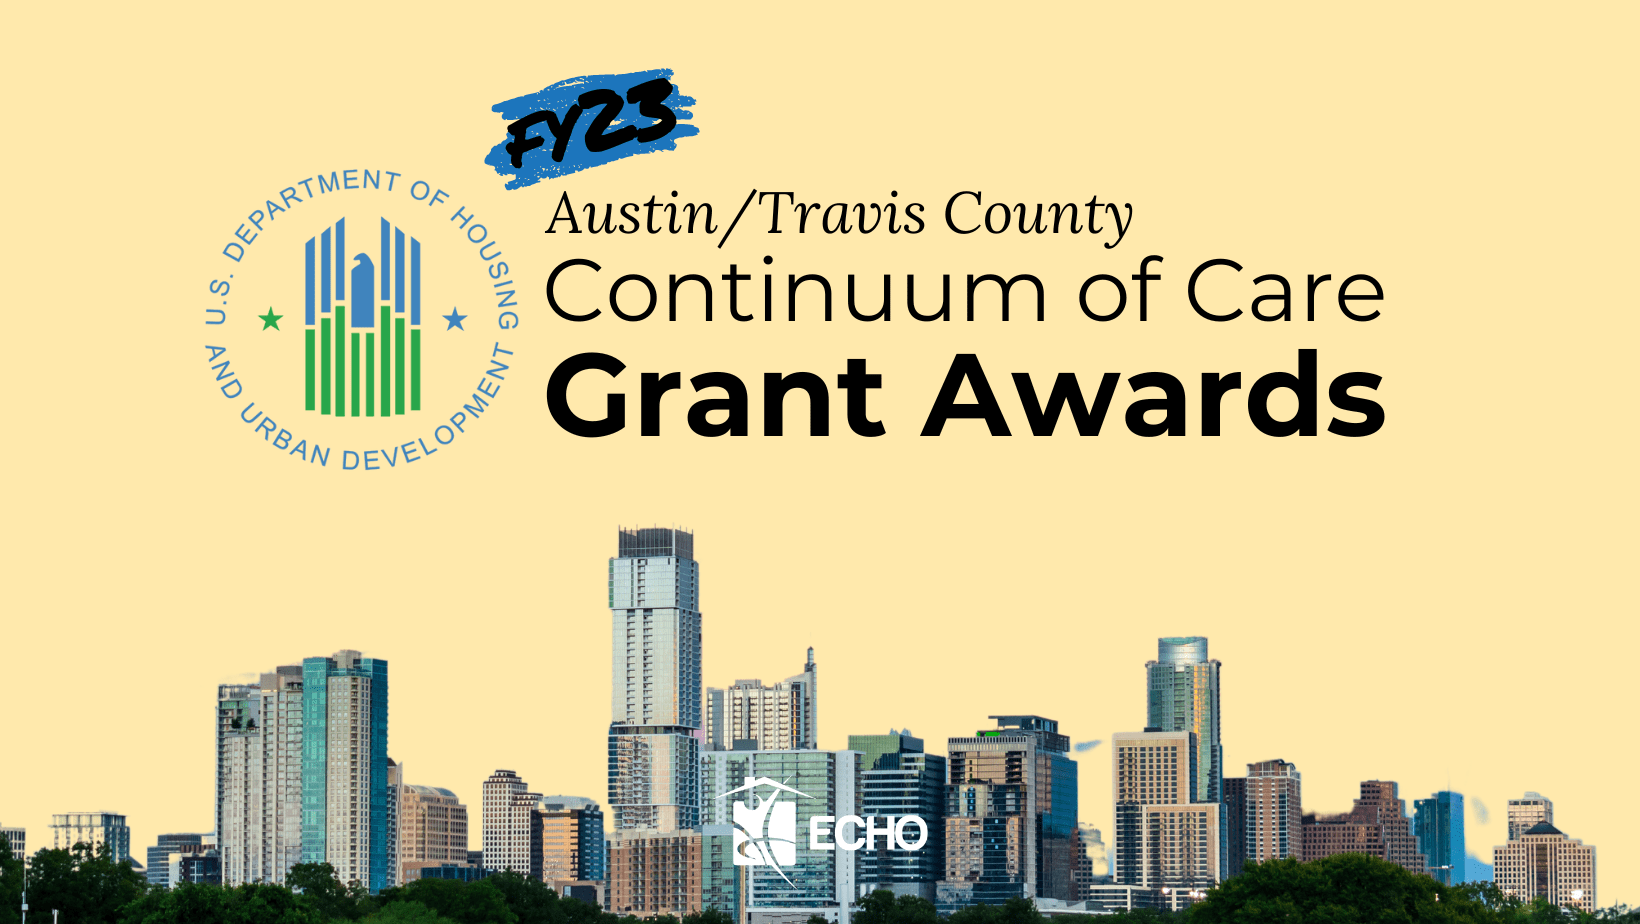 Light yellow background with Austin skyline at bottom, HUD logo, and text that says "FY23 Austin/Travis County Continuum of Care Grant Awards"